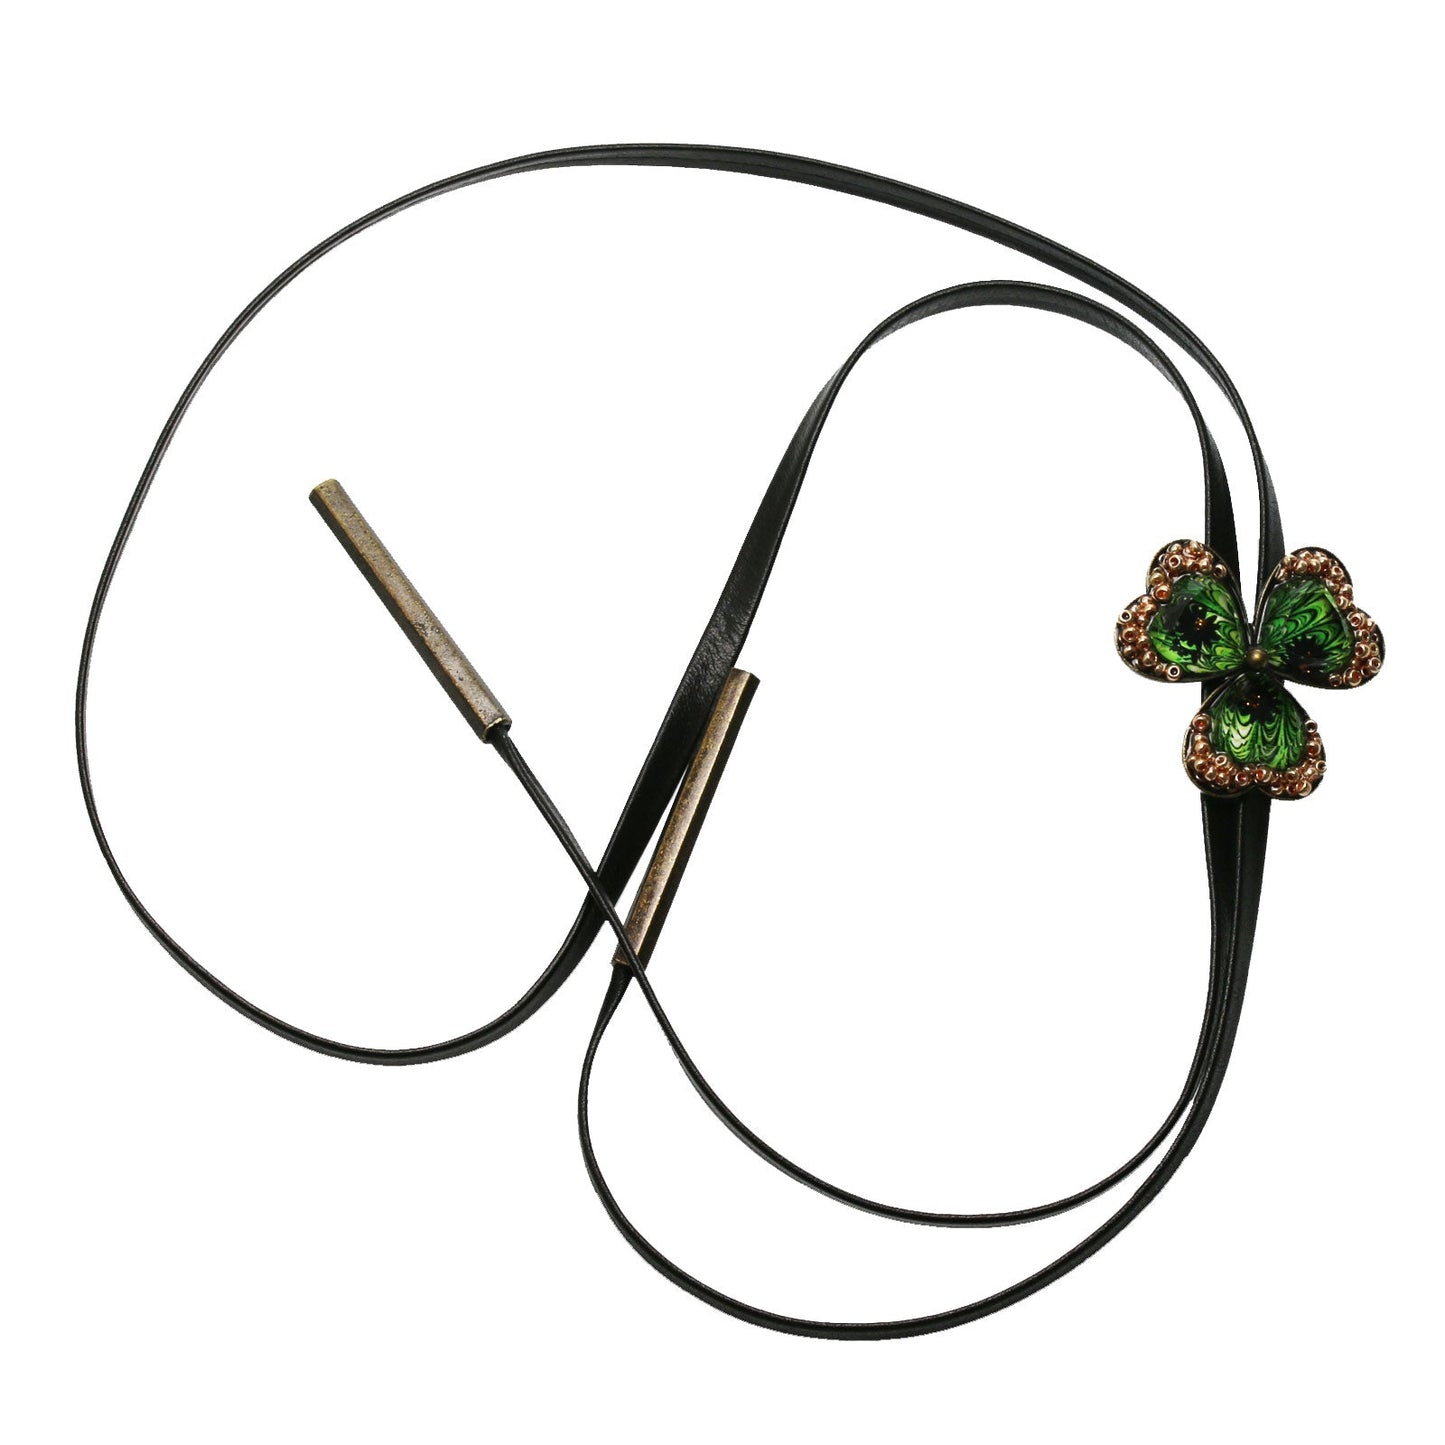 Leather Straps Bolo Tie Clover Marble Green TAMARUSAN